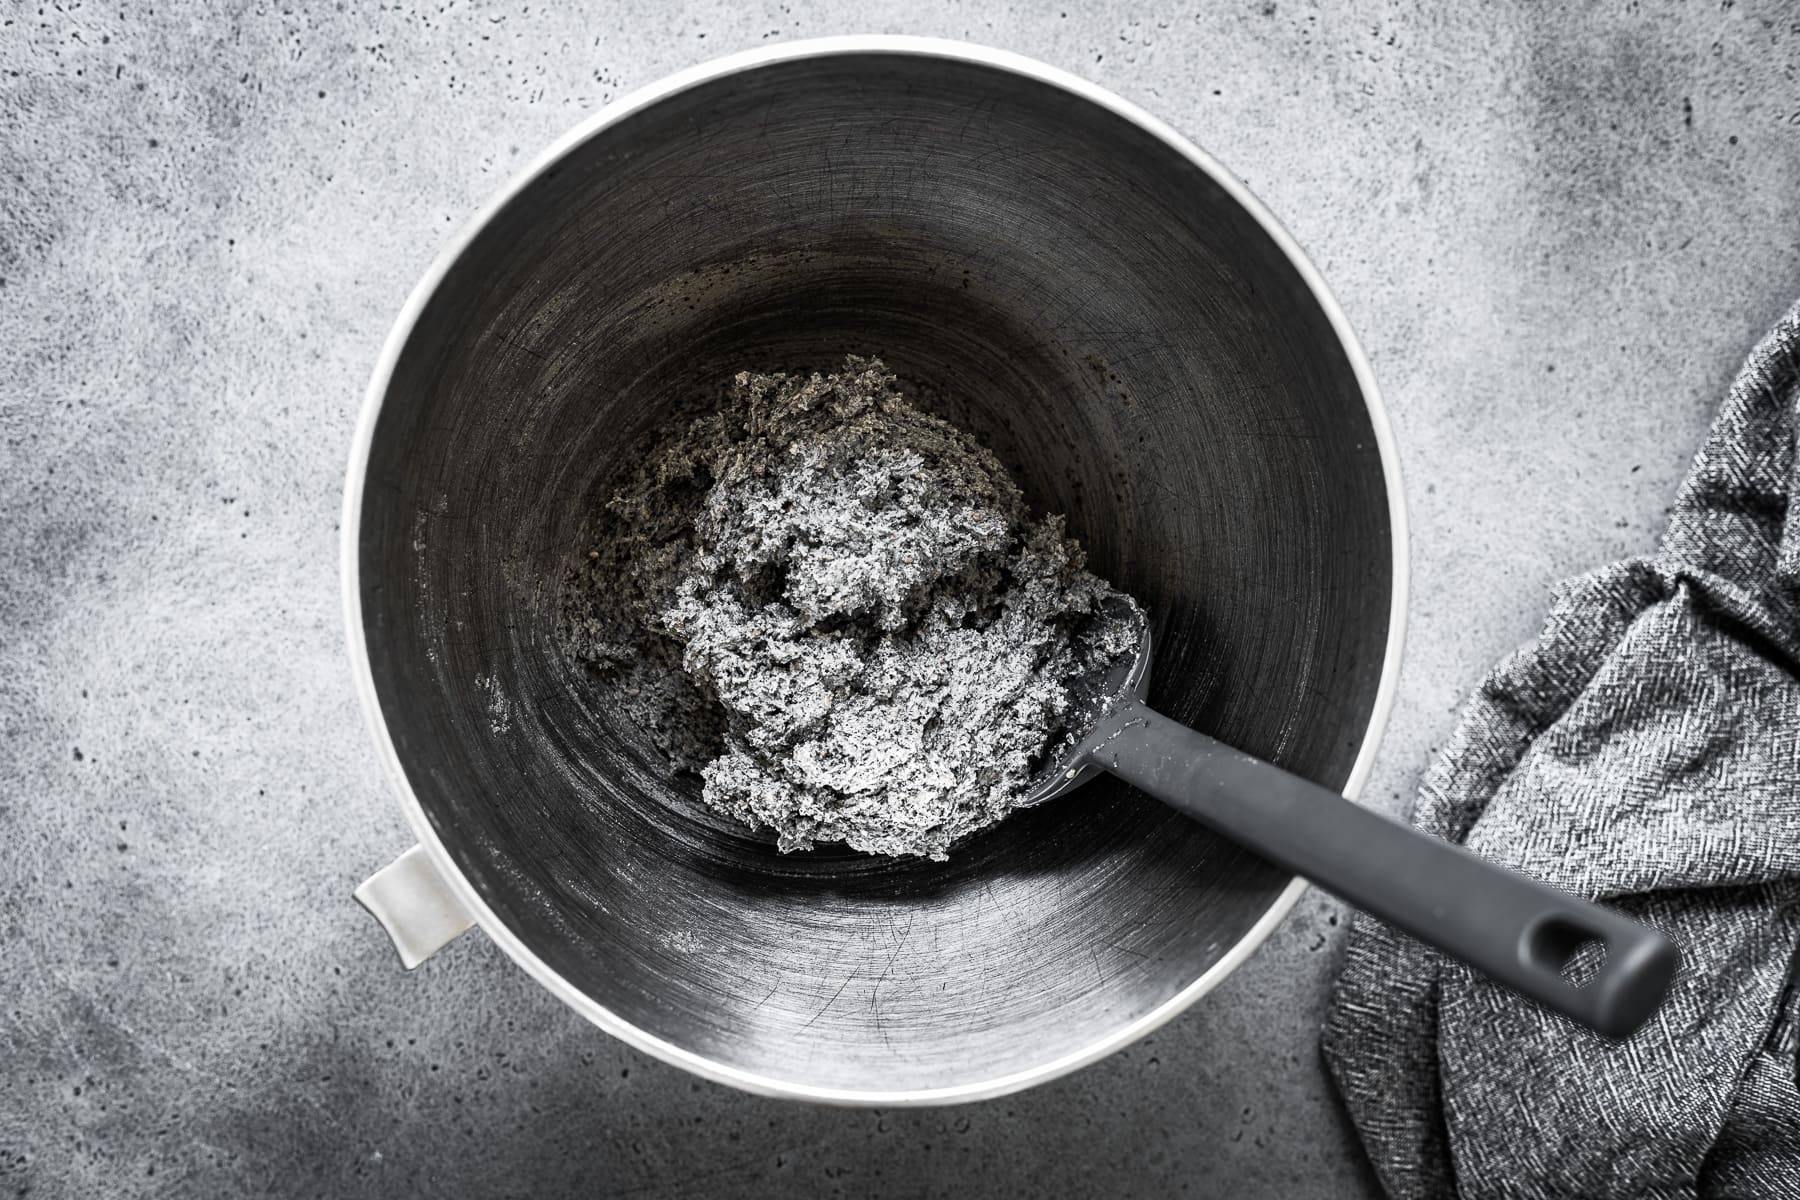 Recipe process shot showing cookie dough in a silver mixing bowl with a grey spatula. The bowl rests on a grey stone surface.